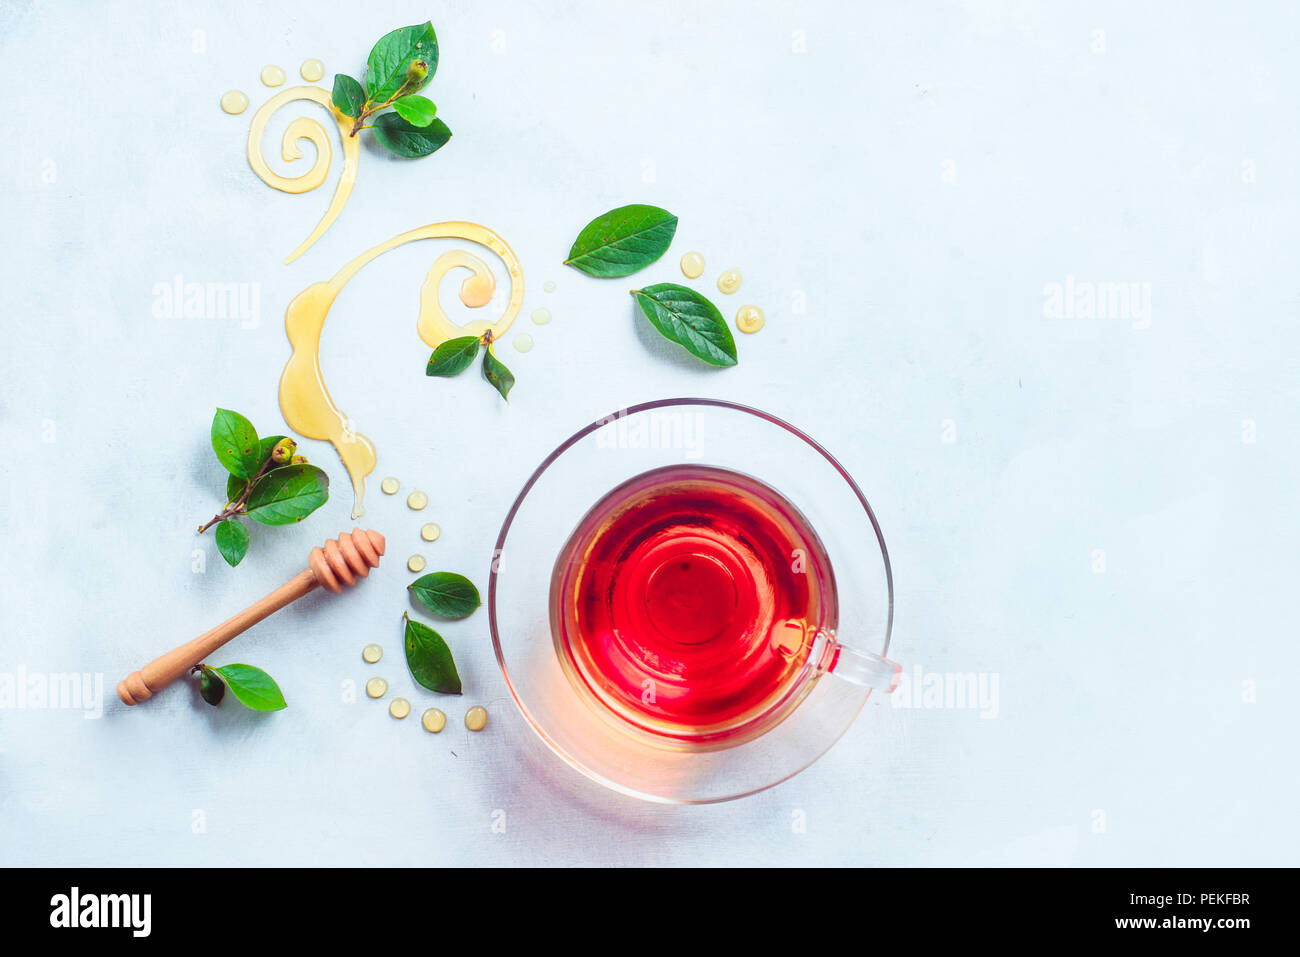 Glass cup of tea with decorative honey swirls and green leaves. Home remedies flat lay on a white background with copy space Stock Photo